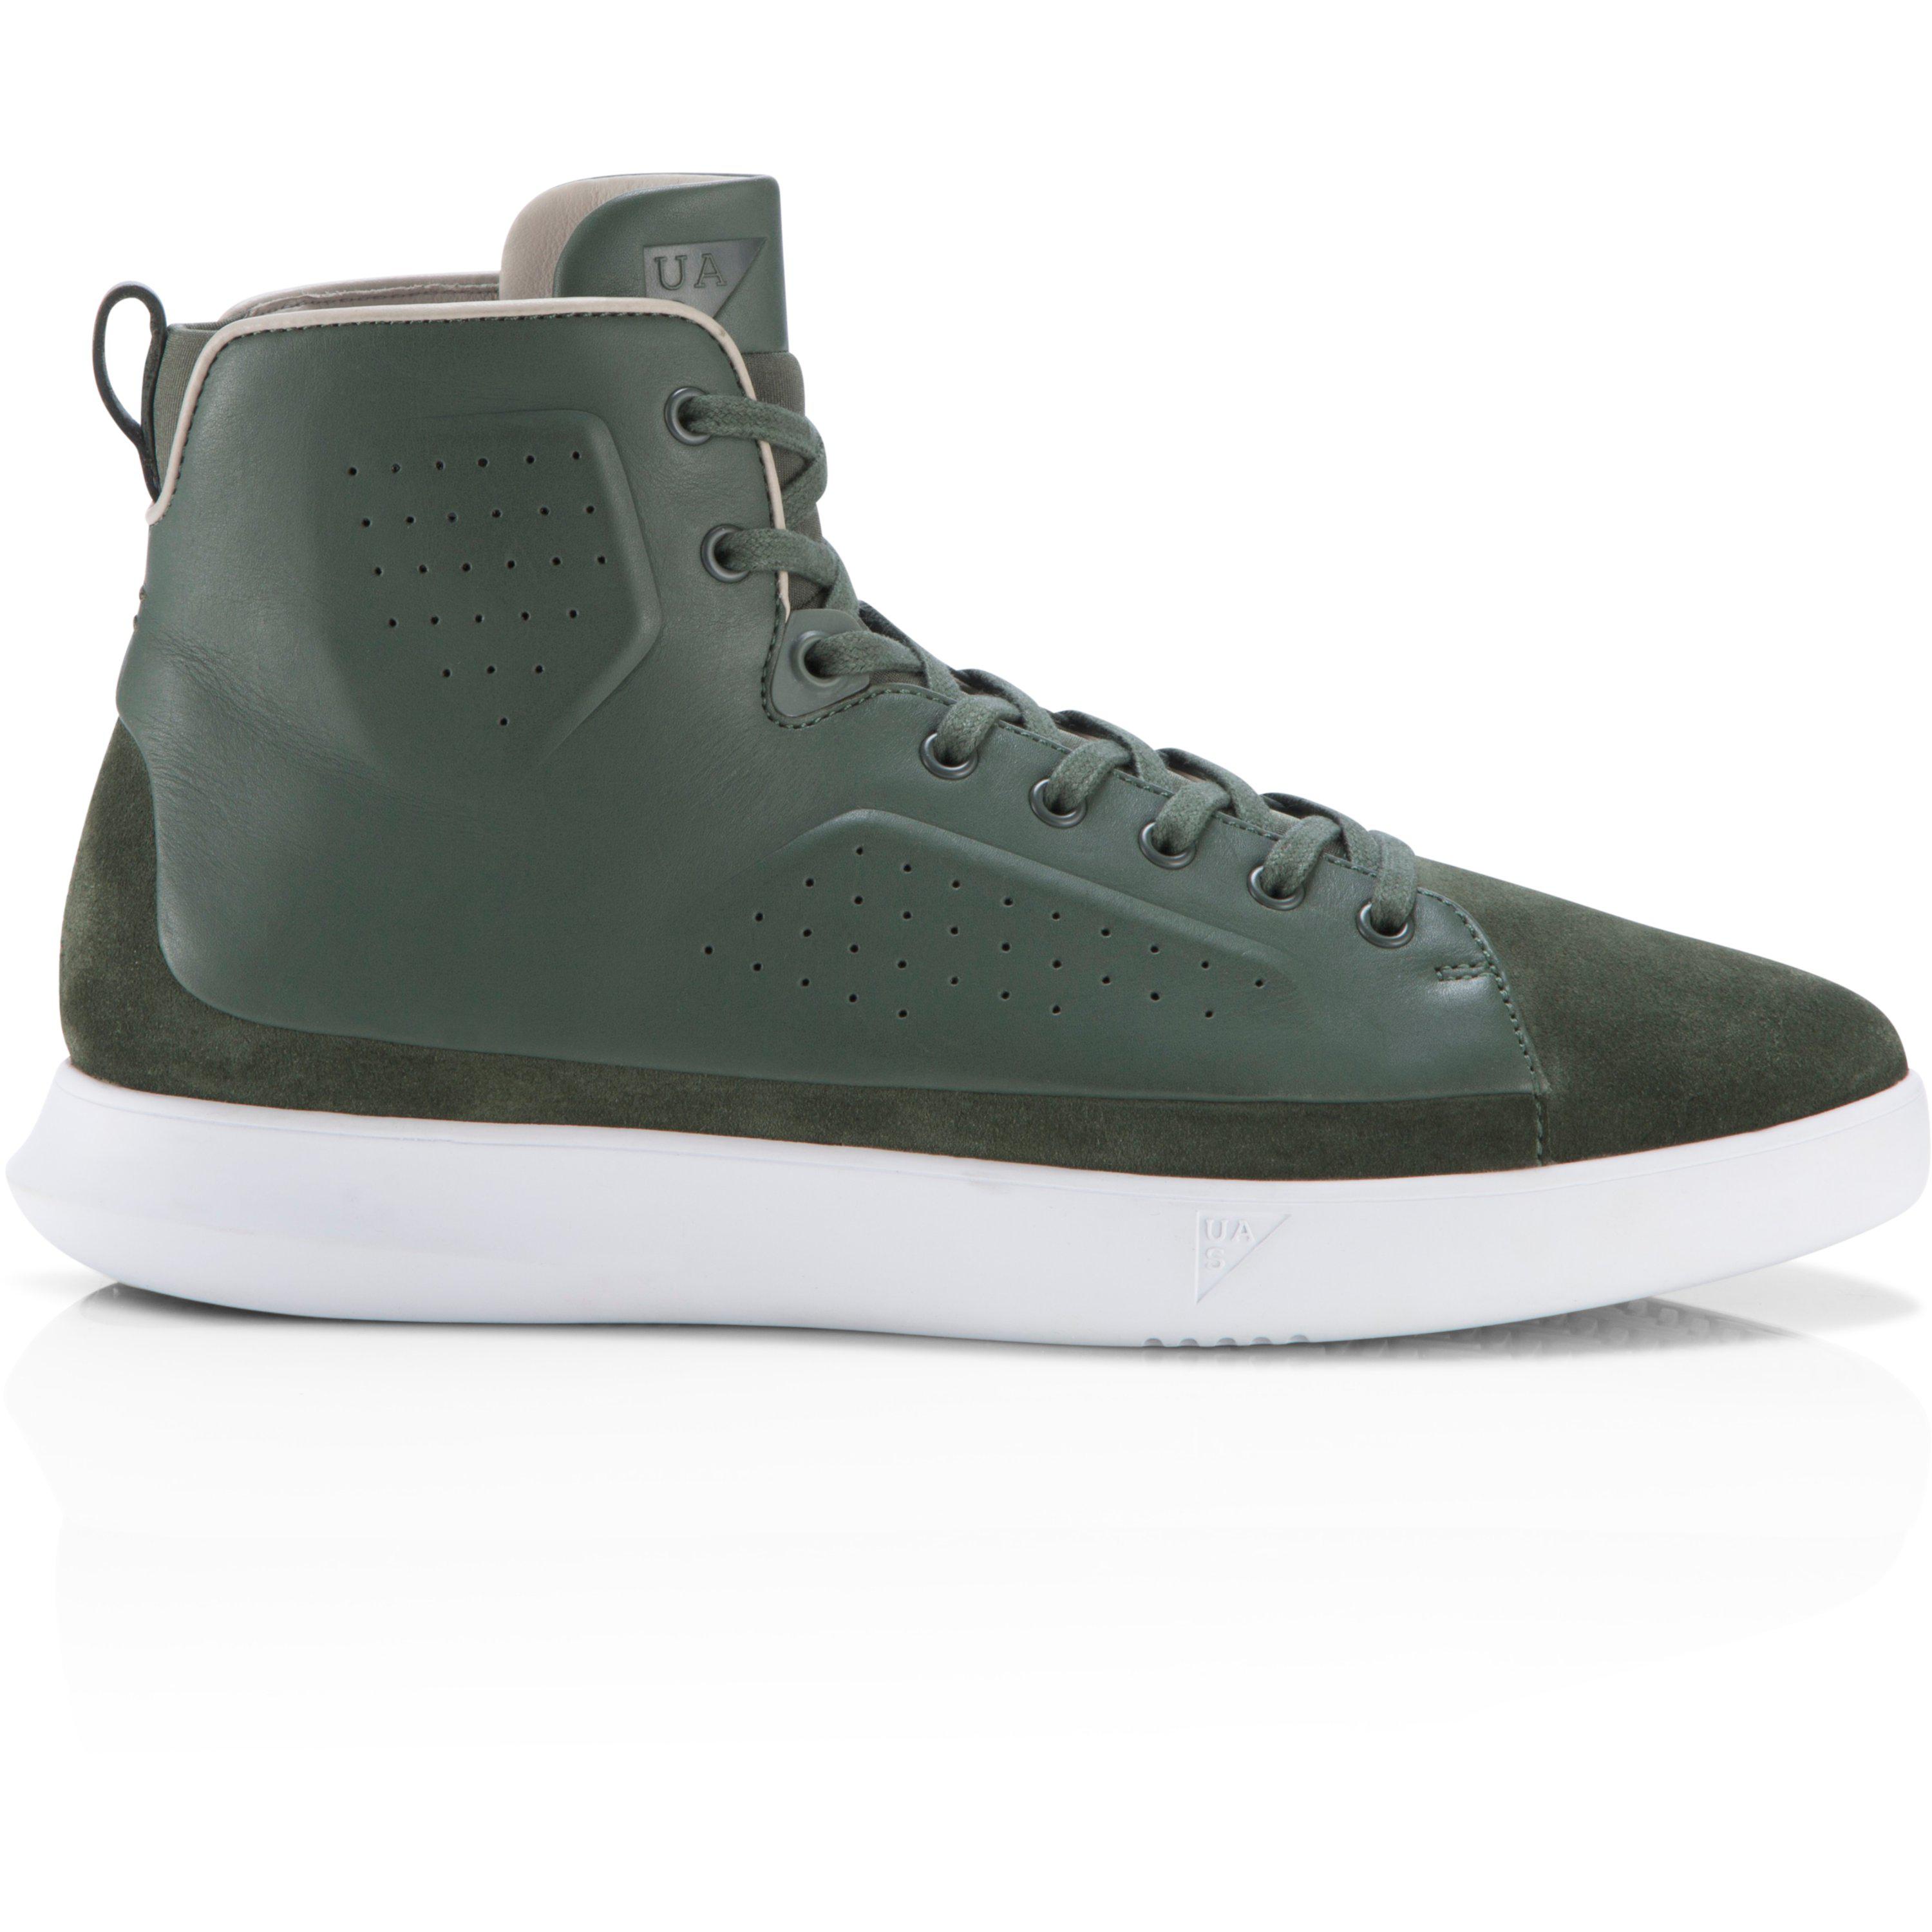 Under Armour Leather Men's Uas Club Mid Shoes in Green for Men - Lyst